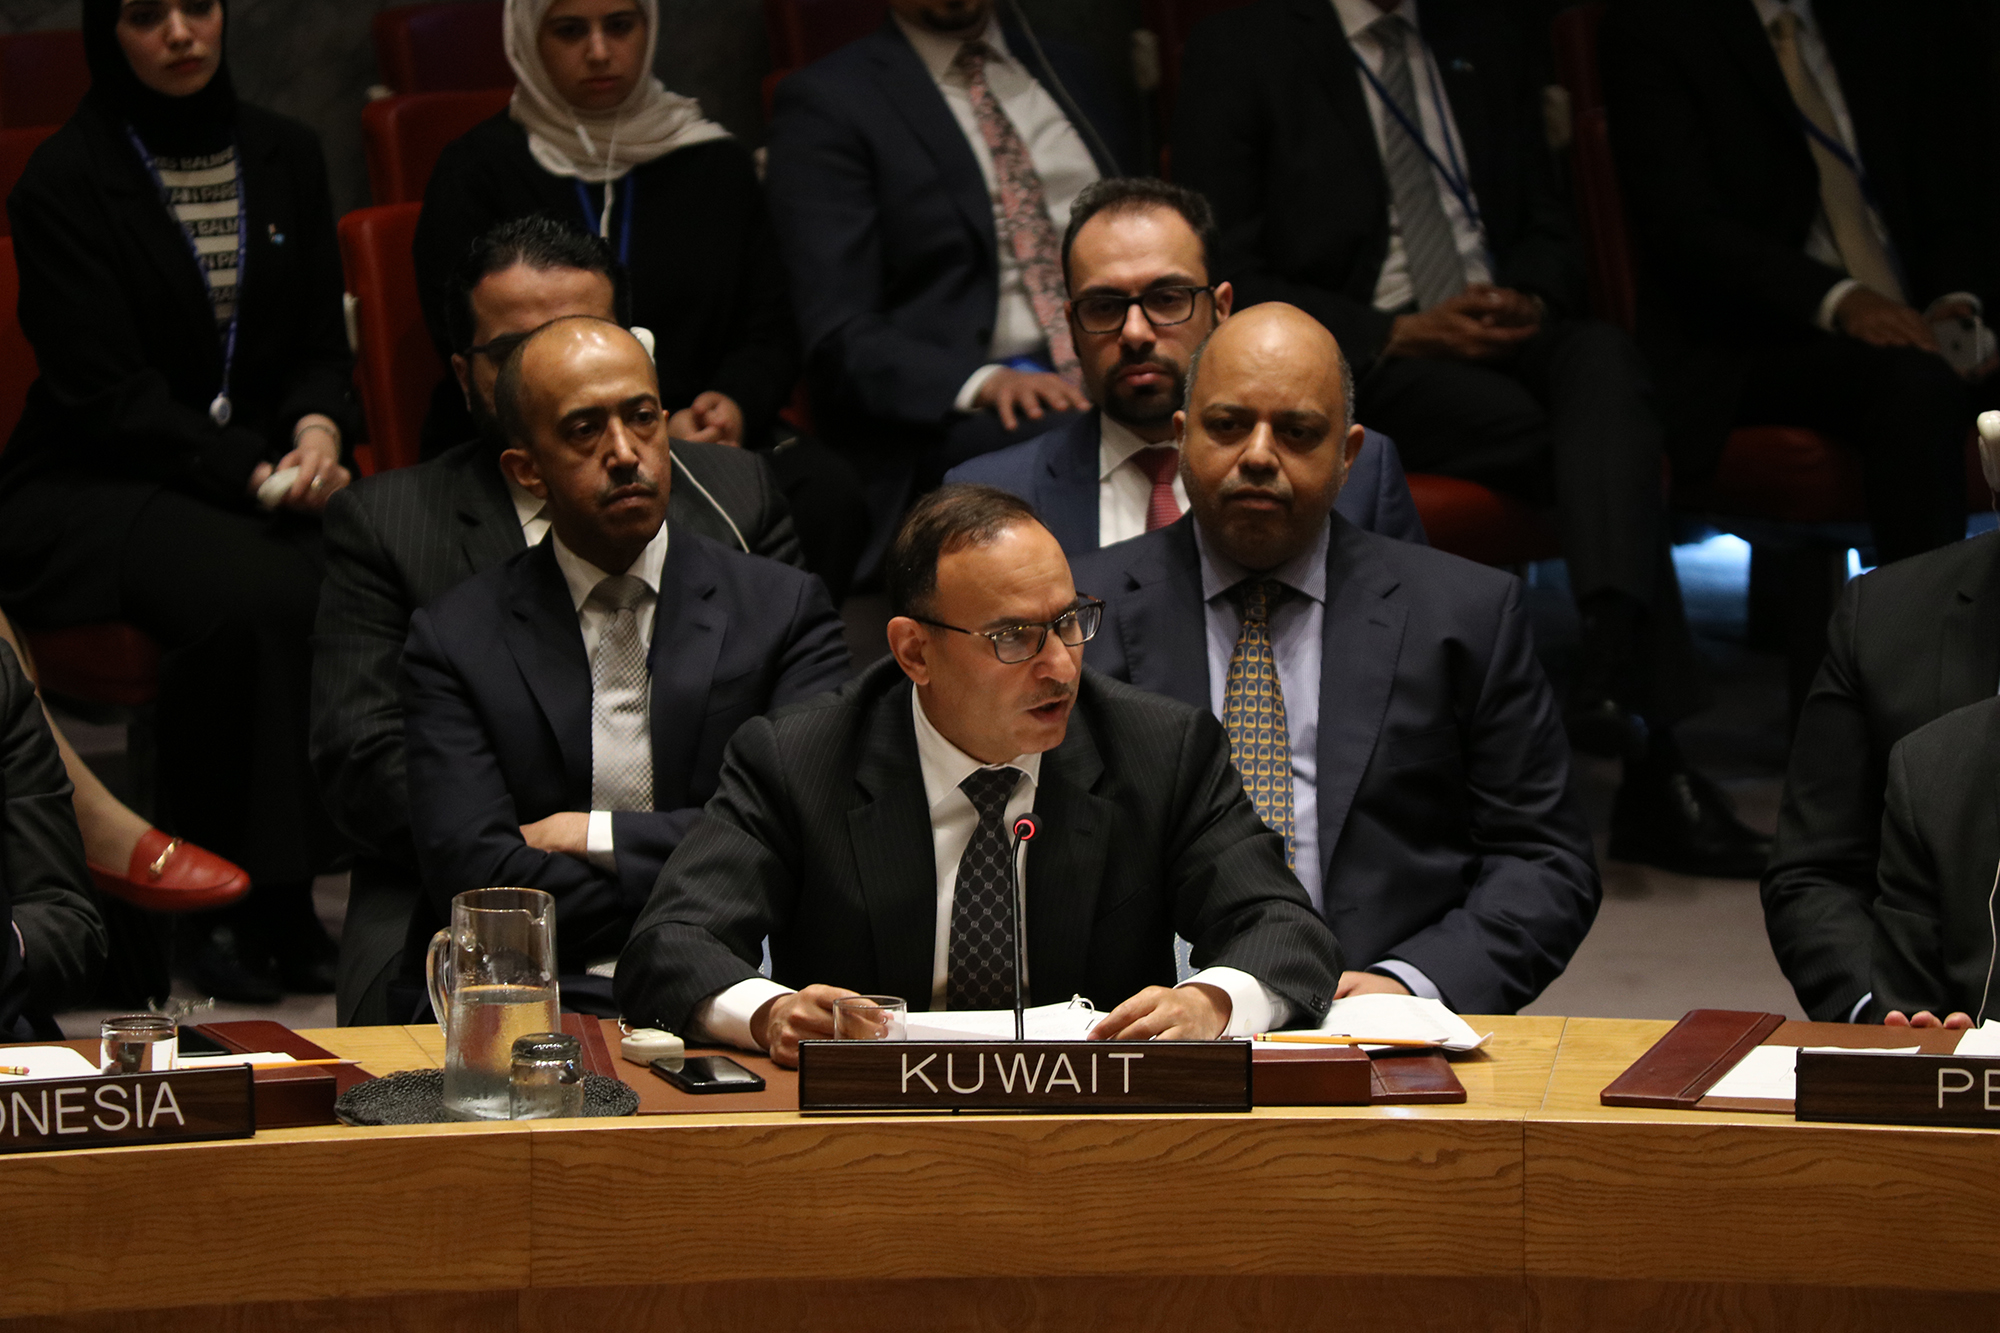 Kuwait Representative to the UN addressing UNSC session